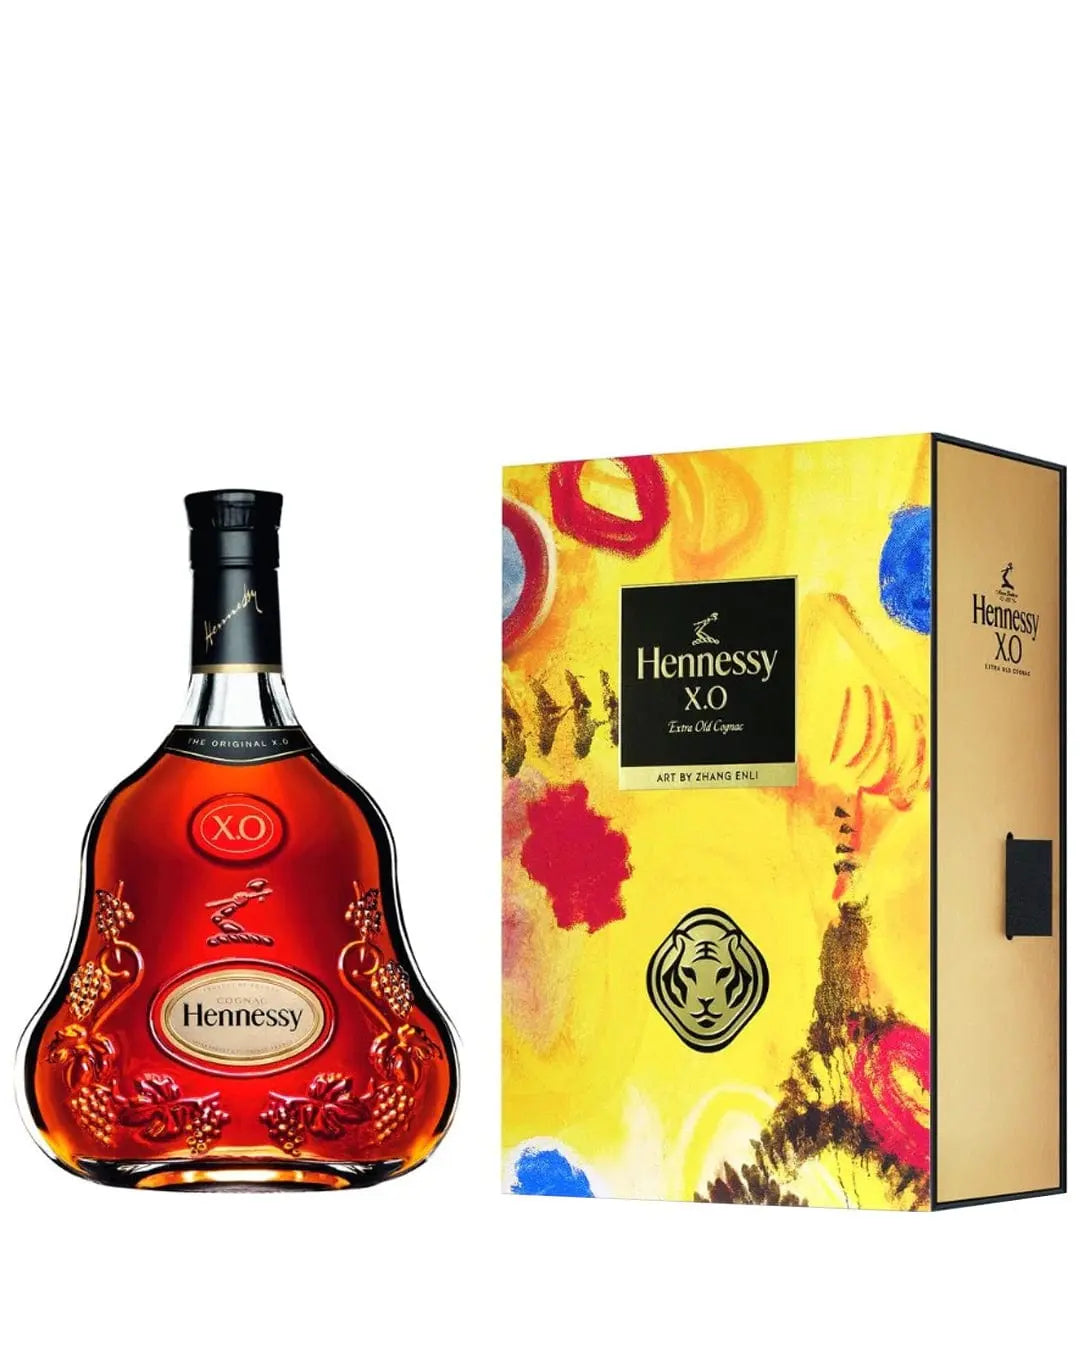 Hennessy X.O Chinese New Year Zhang Eli Sleeve, 70 cl Cognac & Brandy